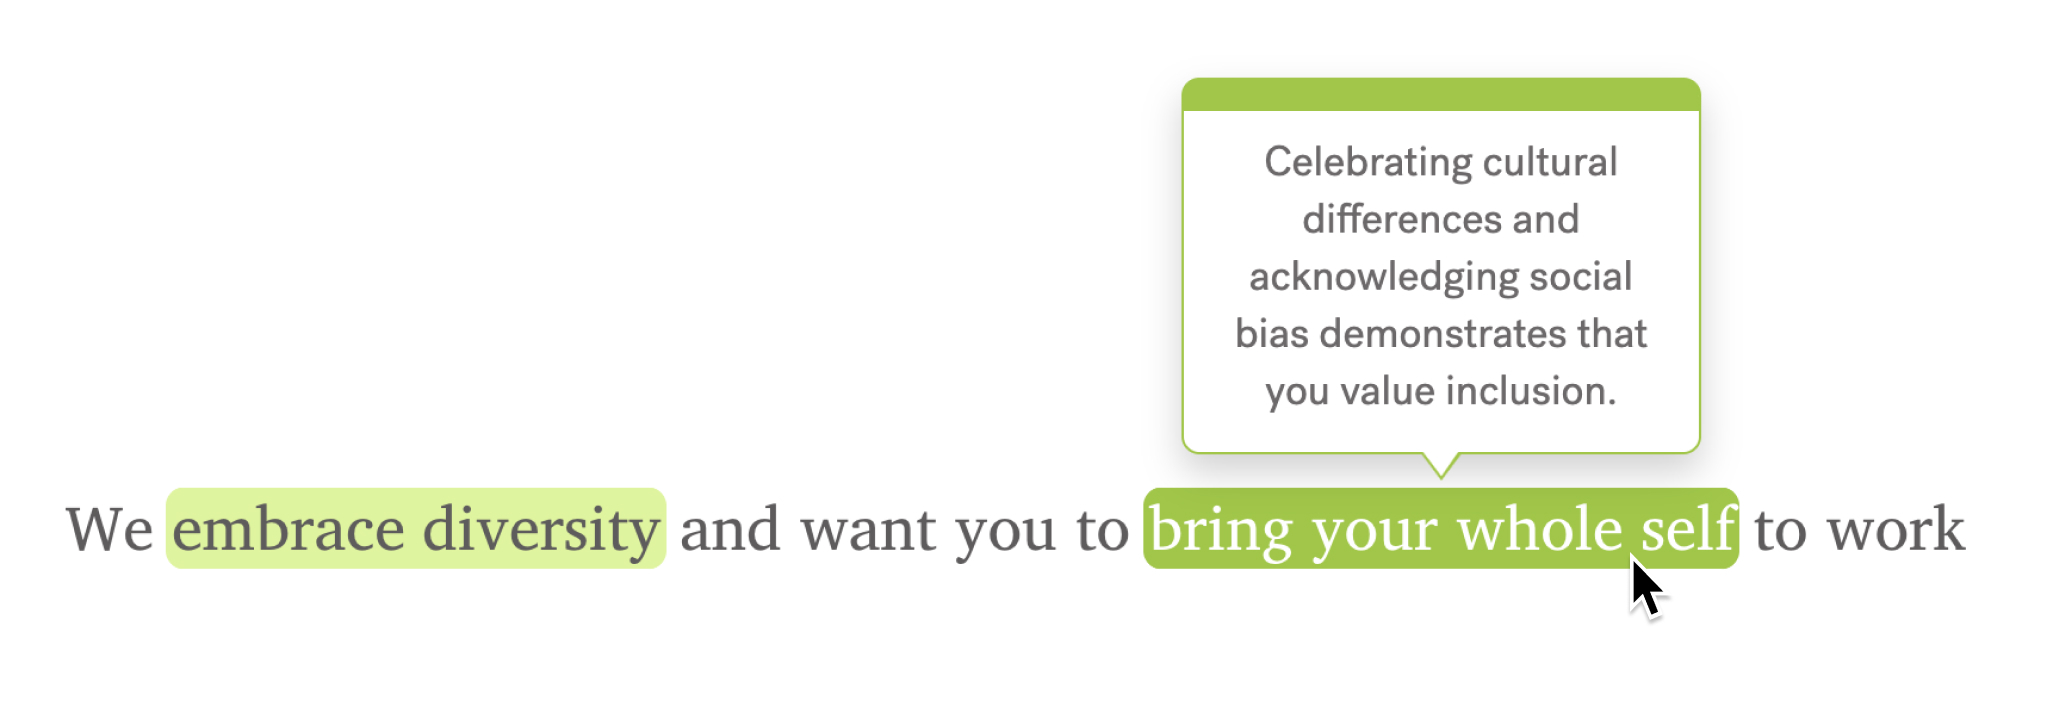 Screenshot of Textio employer brand language guidance for the phrase "bring your whole self" showing a tip that reads "Celebrating cultural difference and acknowledging social bias demonstrates that you value inclusion."